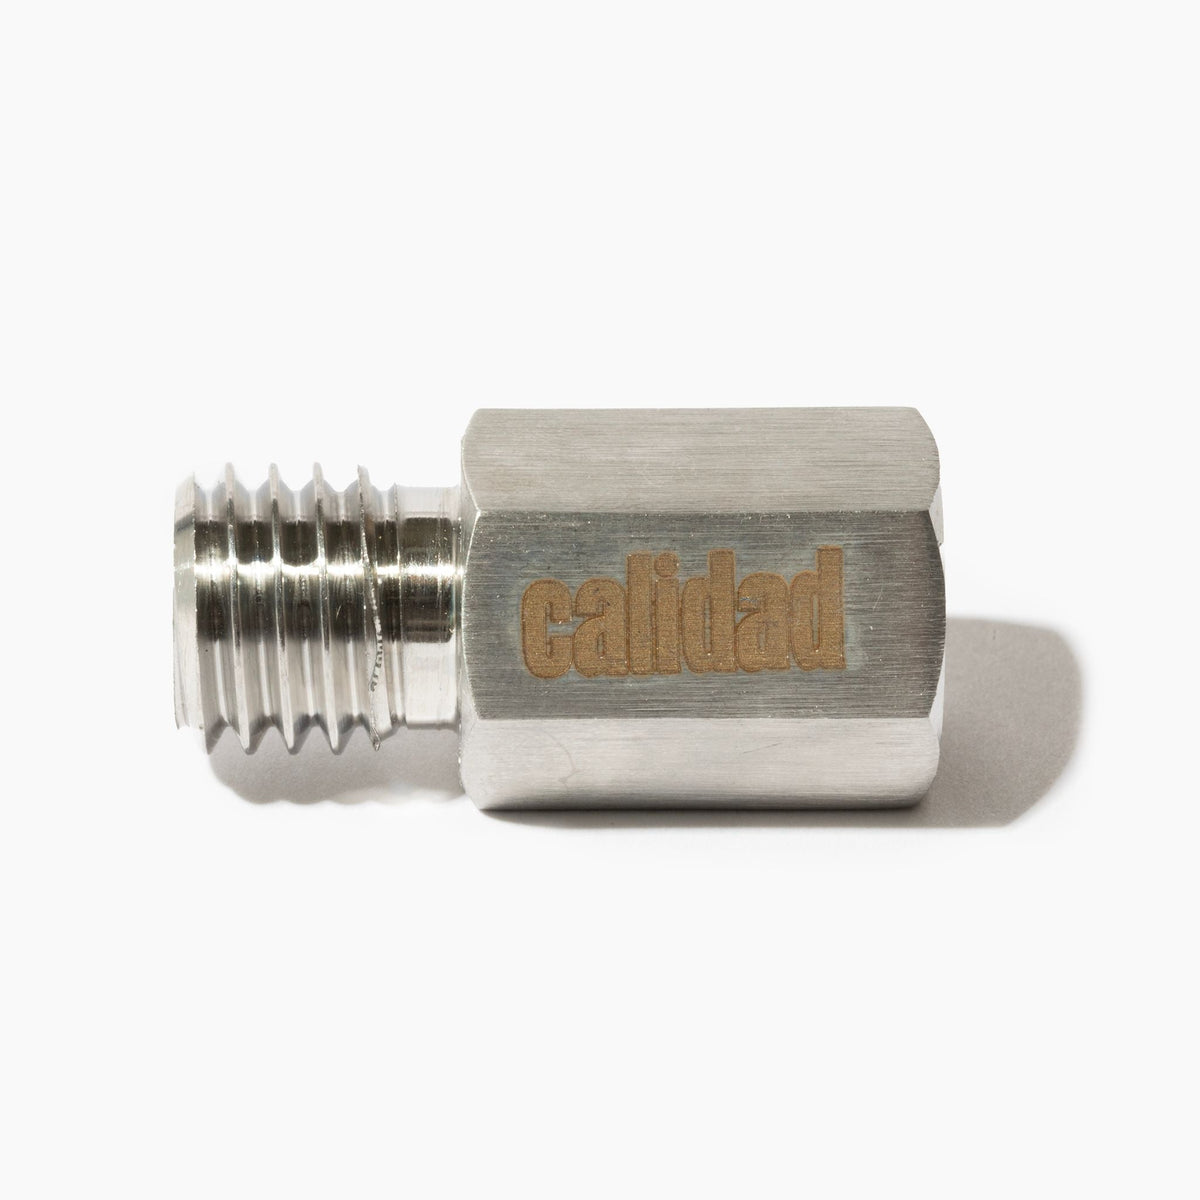 The adapter allows using 5/8&quot;-11 threaded diamond tools like core drill bits, hole saws, profile wheels, cup grinding wheels or other accessories with M14 male threaded hand power tools. 